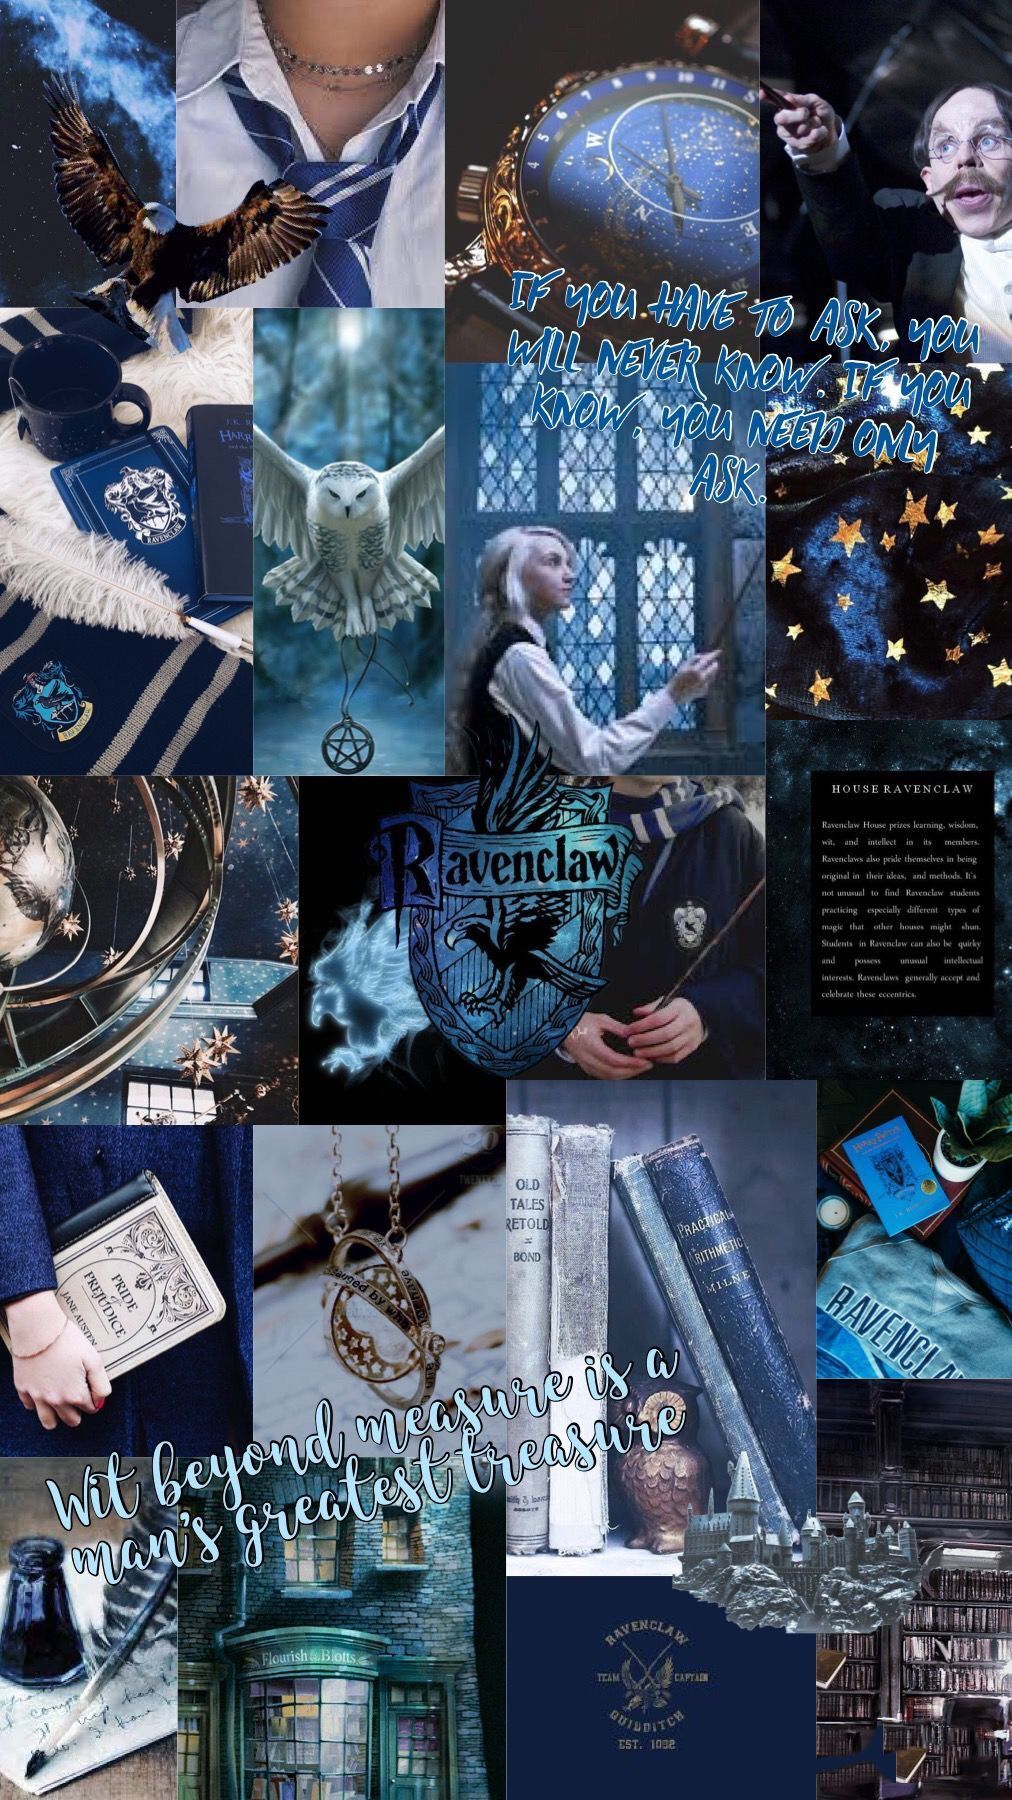 A collage of images of Harry Potter characters and books. - Ravenclaw